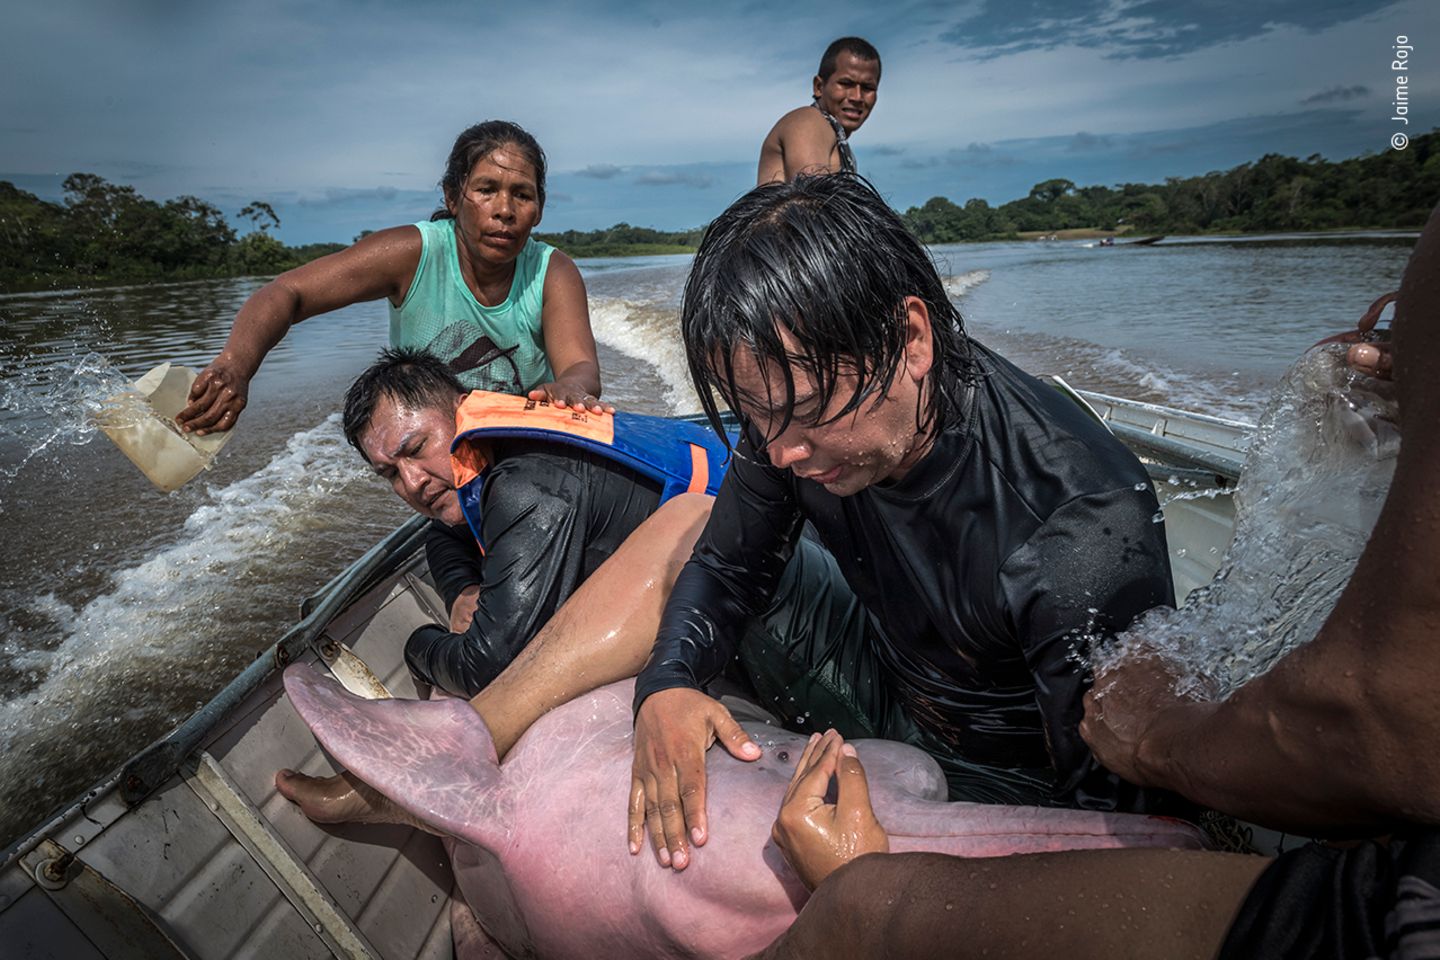 Dolphin hug by Jaime Rojo, Spain  Jaime watched on as Federico Mosquera, a biologist from the Omacha Foundation, Colombia, soothed an Amazon river dolphin. These dolphins are extremely tactile animals and direct contact calms them – keeping them hydrated when out of the water is also extremely important. The team from Omacha and WWF were transporting the dolphin to a temporary veterinarian facility in Puerto Nariño, Colombia, to install a GPS tag in its dorsal fin. The project is part of a broader scientific attempt to understand river dolphin health and migratory patterns. The goal was to tag five individuals, but high waters gave the dolphins a wider roaming range than usual, and the crew struggled, tagging only one during the expedition. Nikon D5 + 24–70mm f2.8 lens; 1/800 sec at f10; ISO 500.